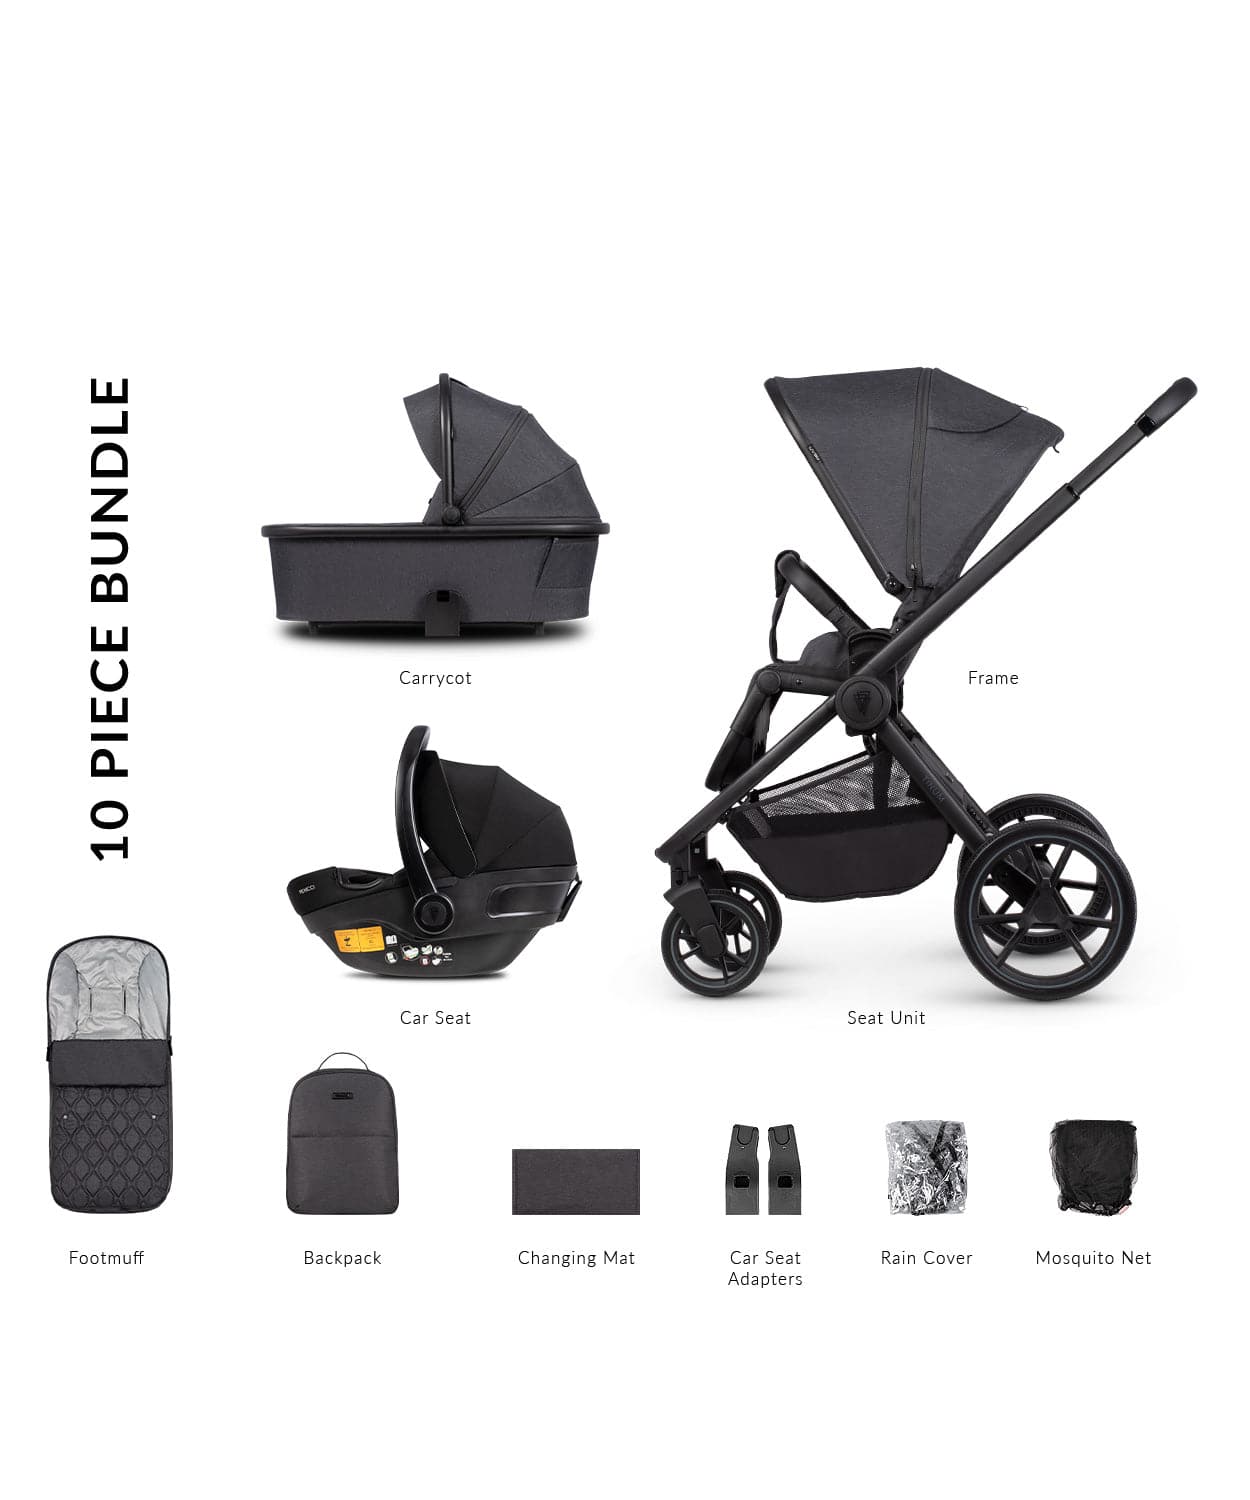 Venicci Tinum Edge 3 In 1 Travel System - Charcoal - For Your Little One